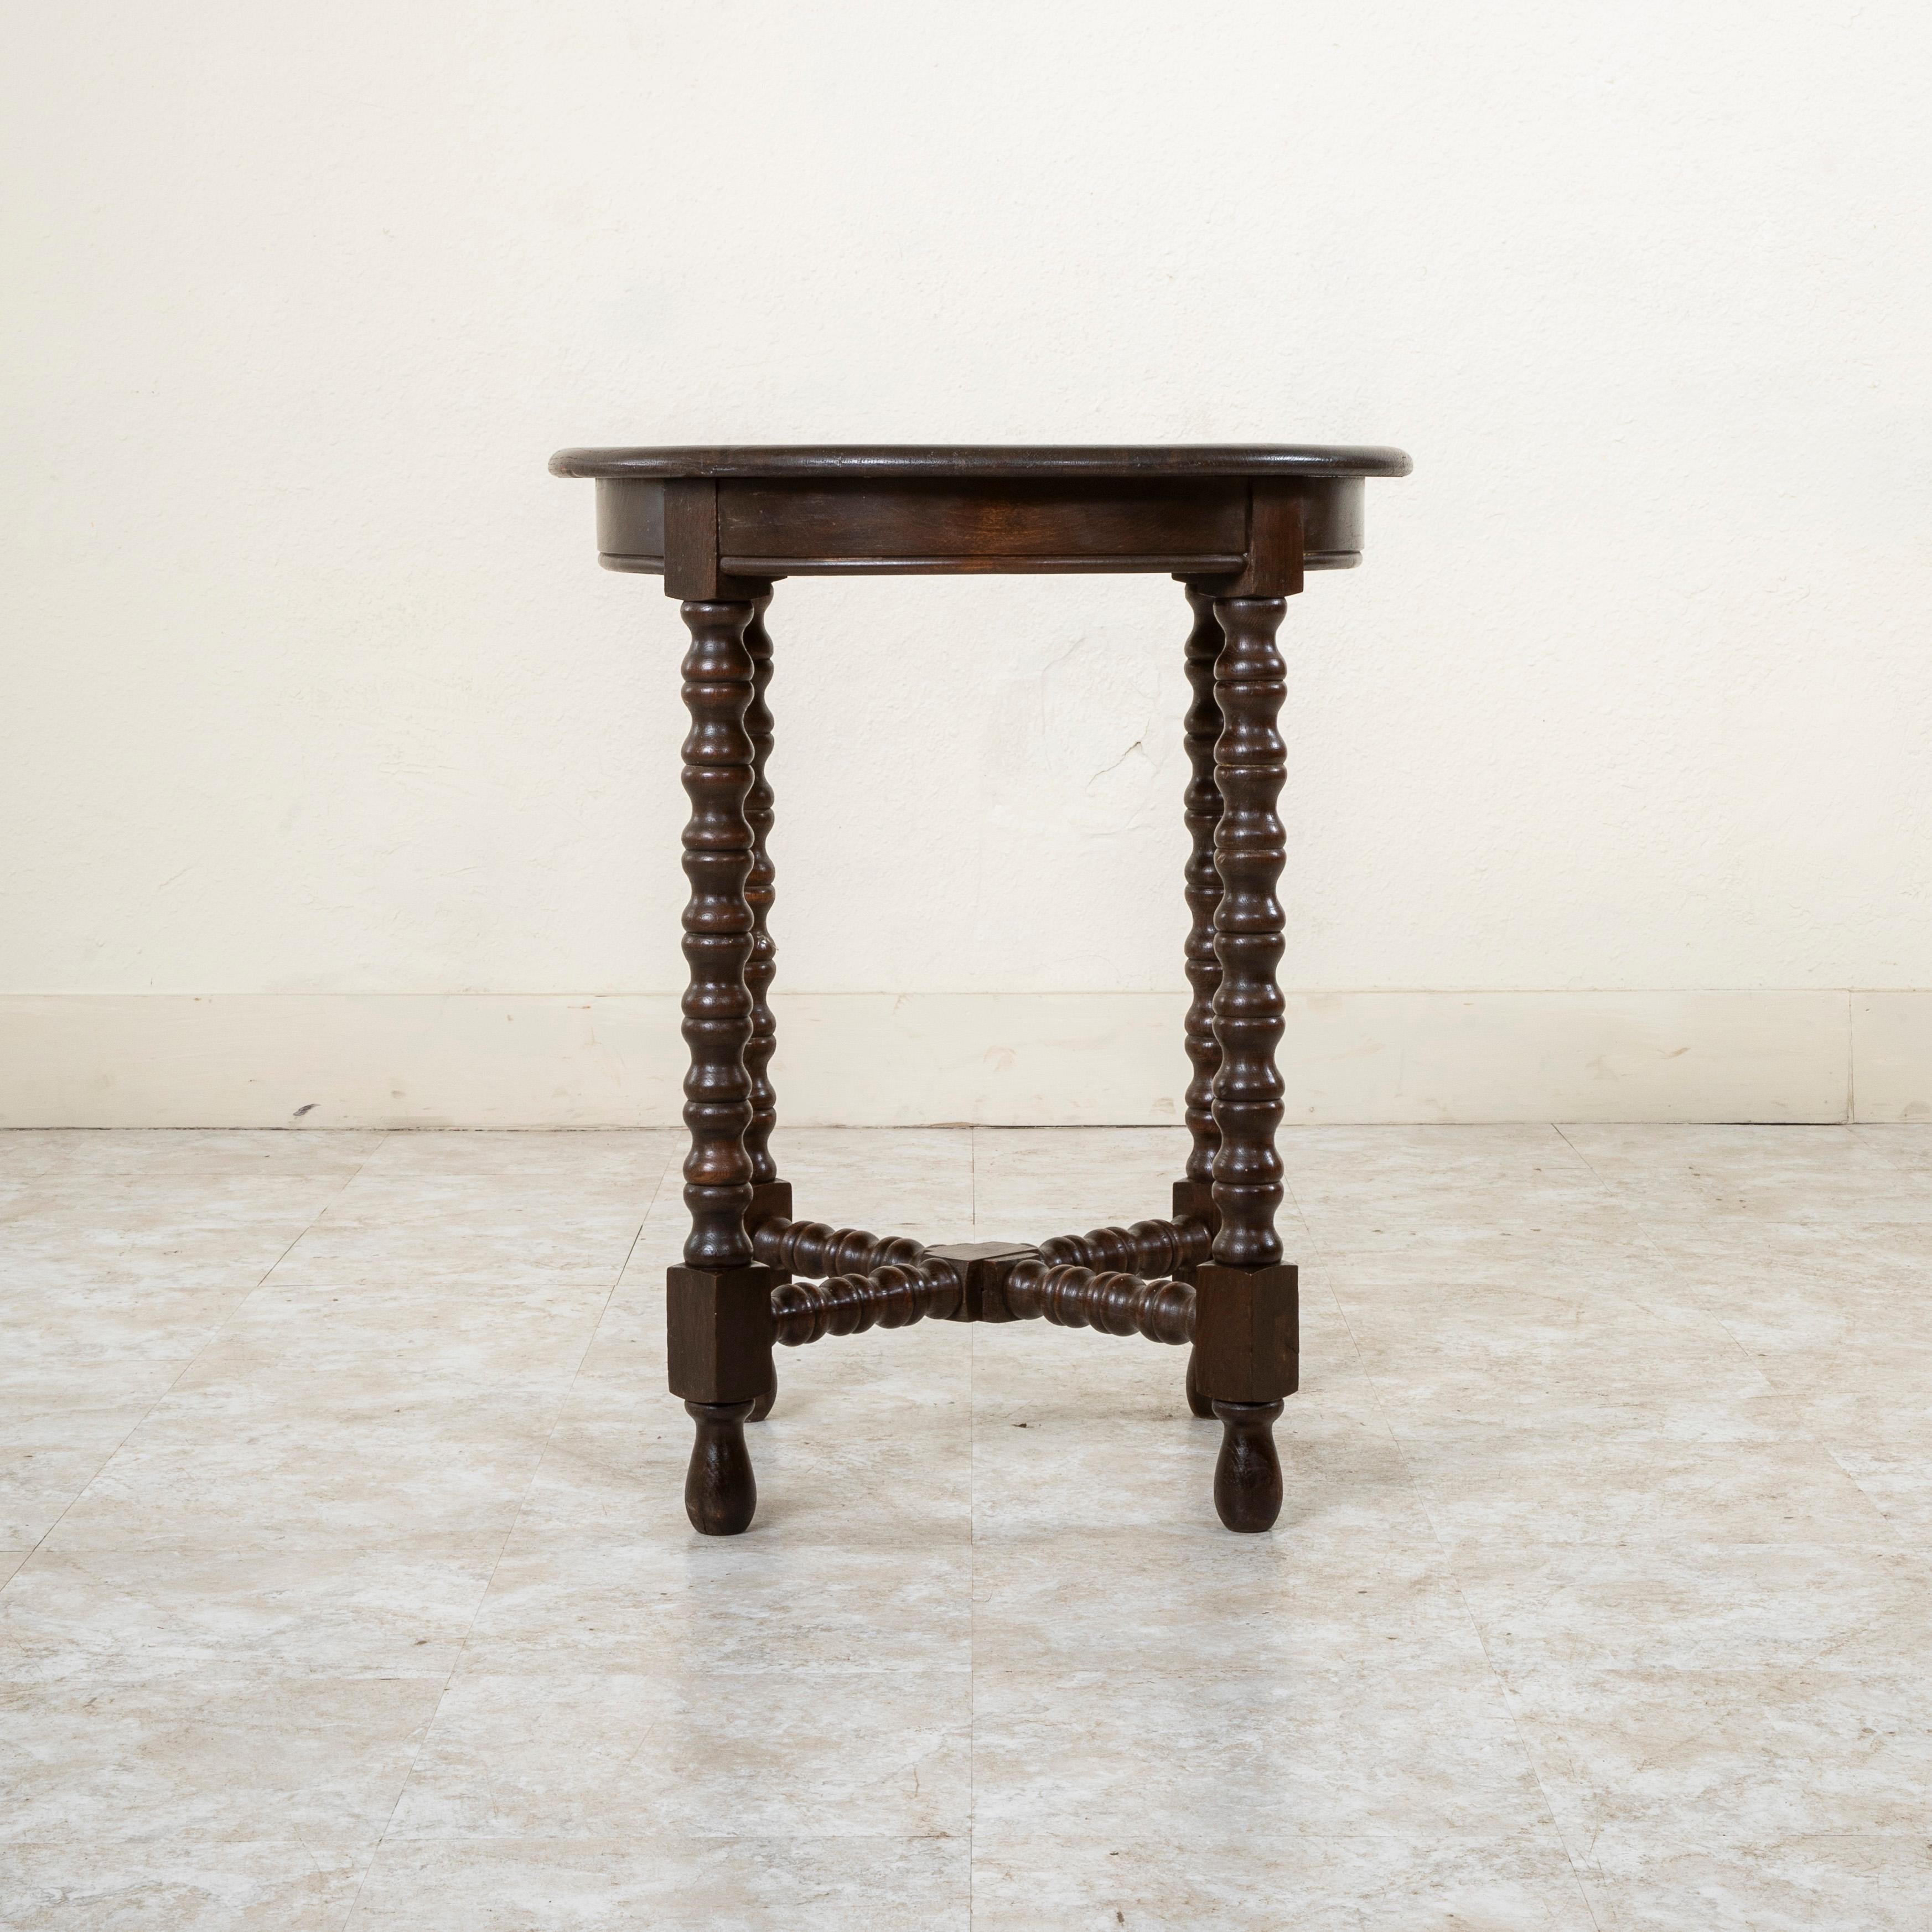 Early 20th Century French Oak Side Table or End Table with Turned Legs, C. 1900